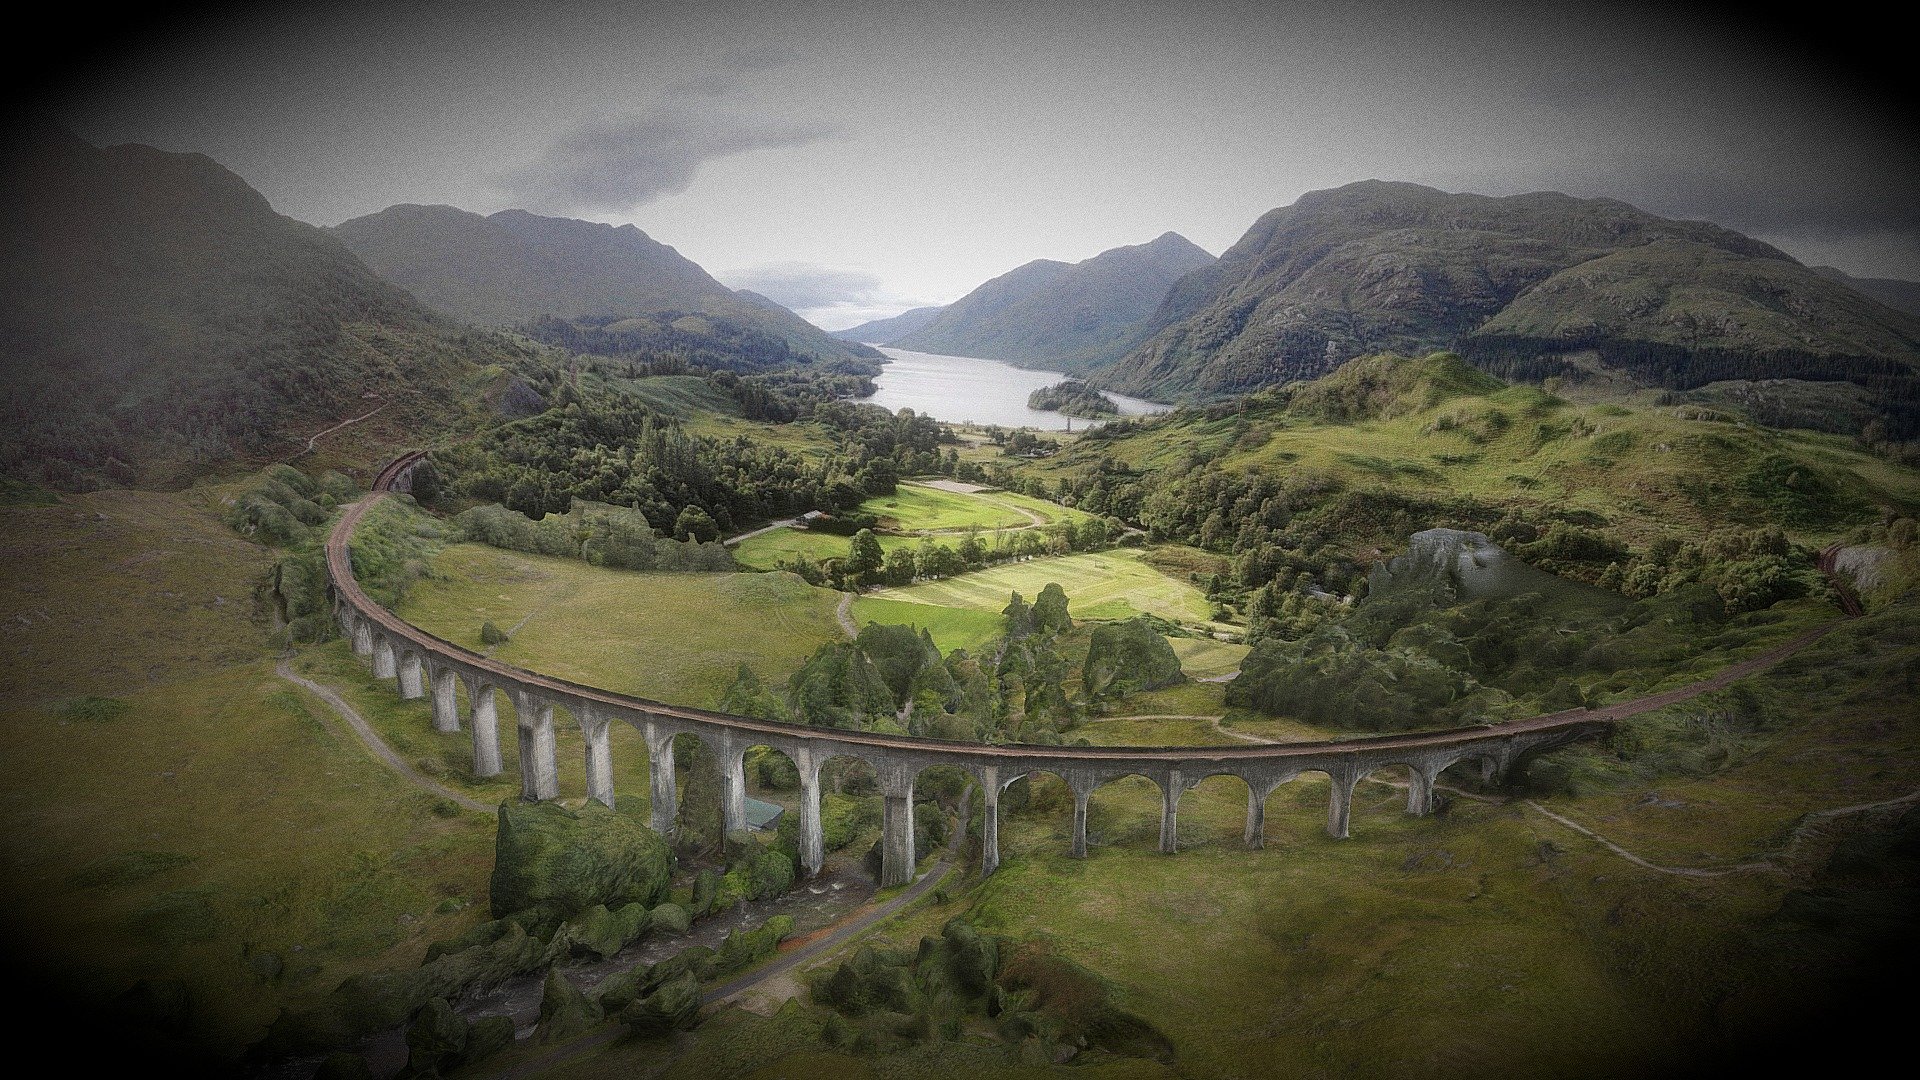 Glenfinnan Viaduct ,  made famous by the Harry Potter movies - Glenfinnan Viaduct bridge model, Scotland - Buy Royalty Free 3D model by Vr Interiors (@vrInteriors) 3d model